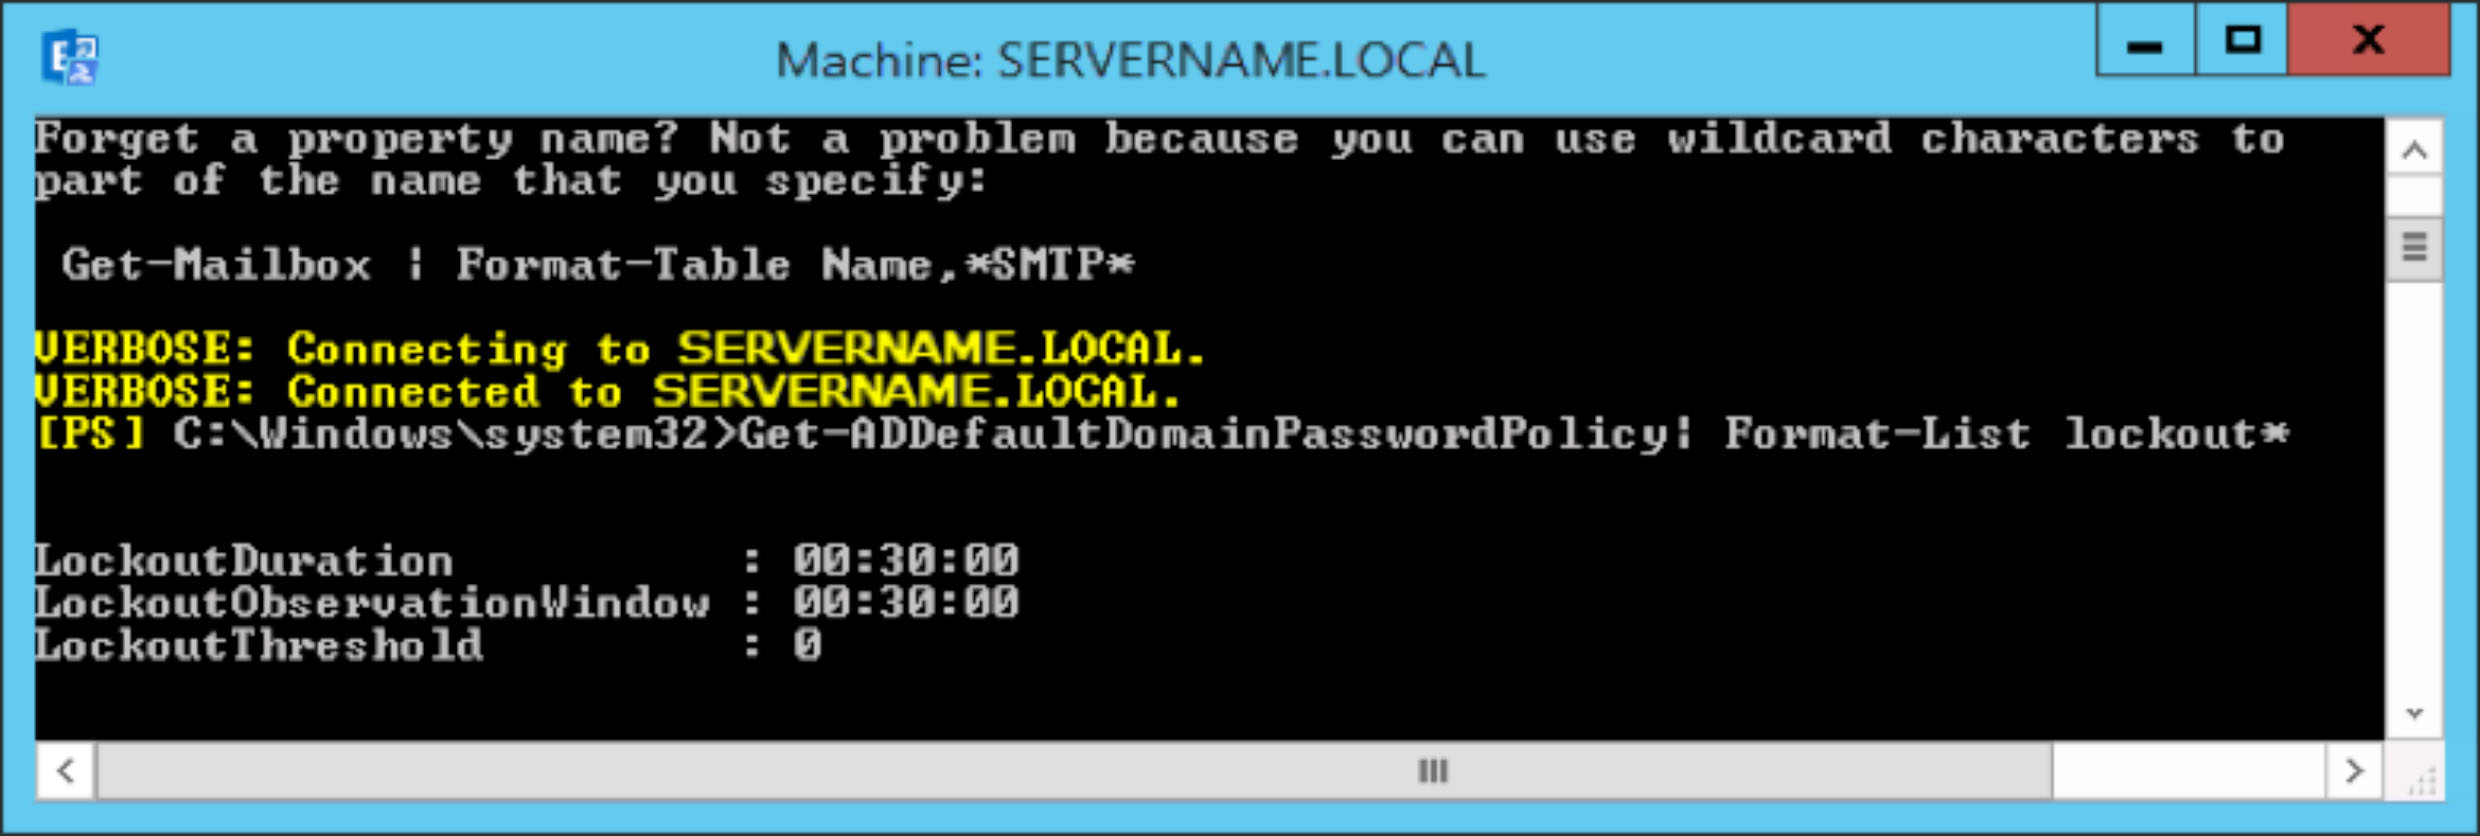 Powershell command to check LockoutThreshold for Active Directory